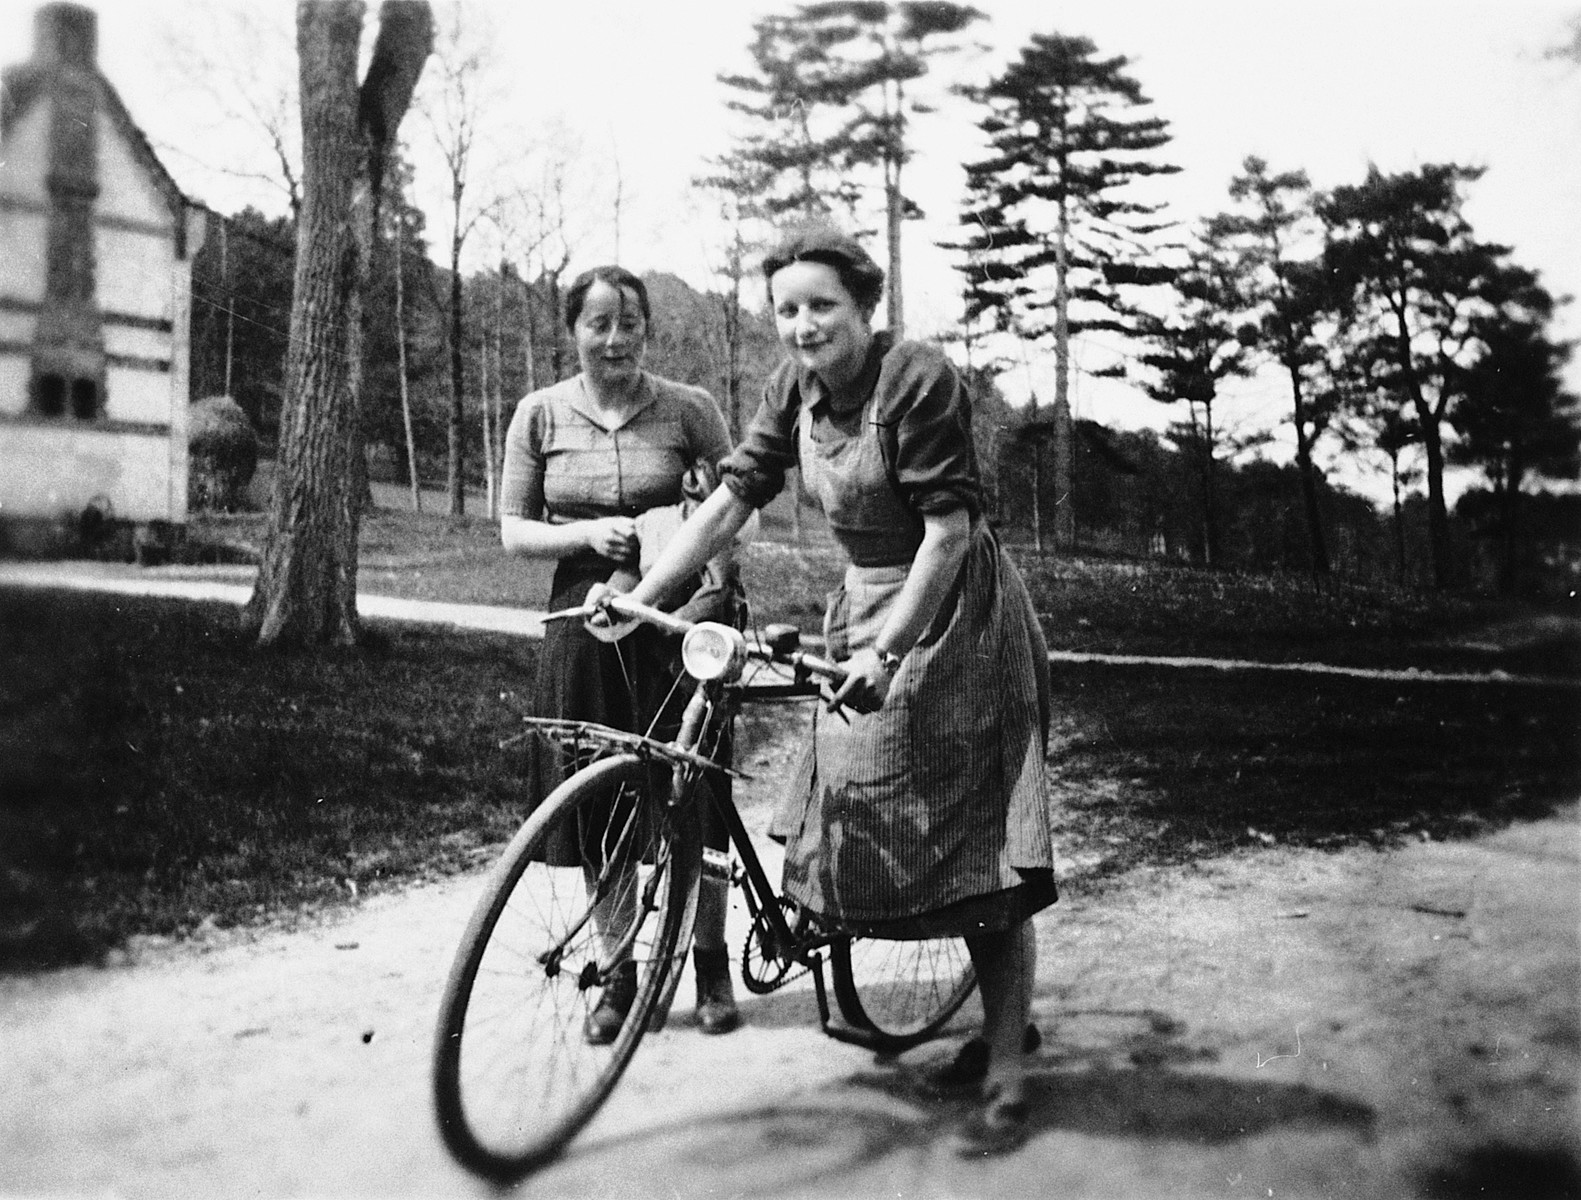 Magrit Taennler rides a bicycle near Chateau de la Hille while Ms. Tobler looks on.